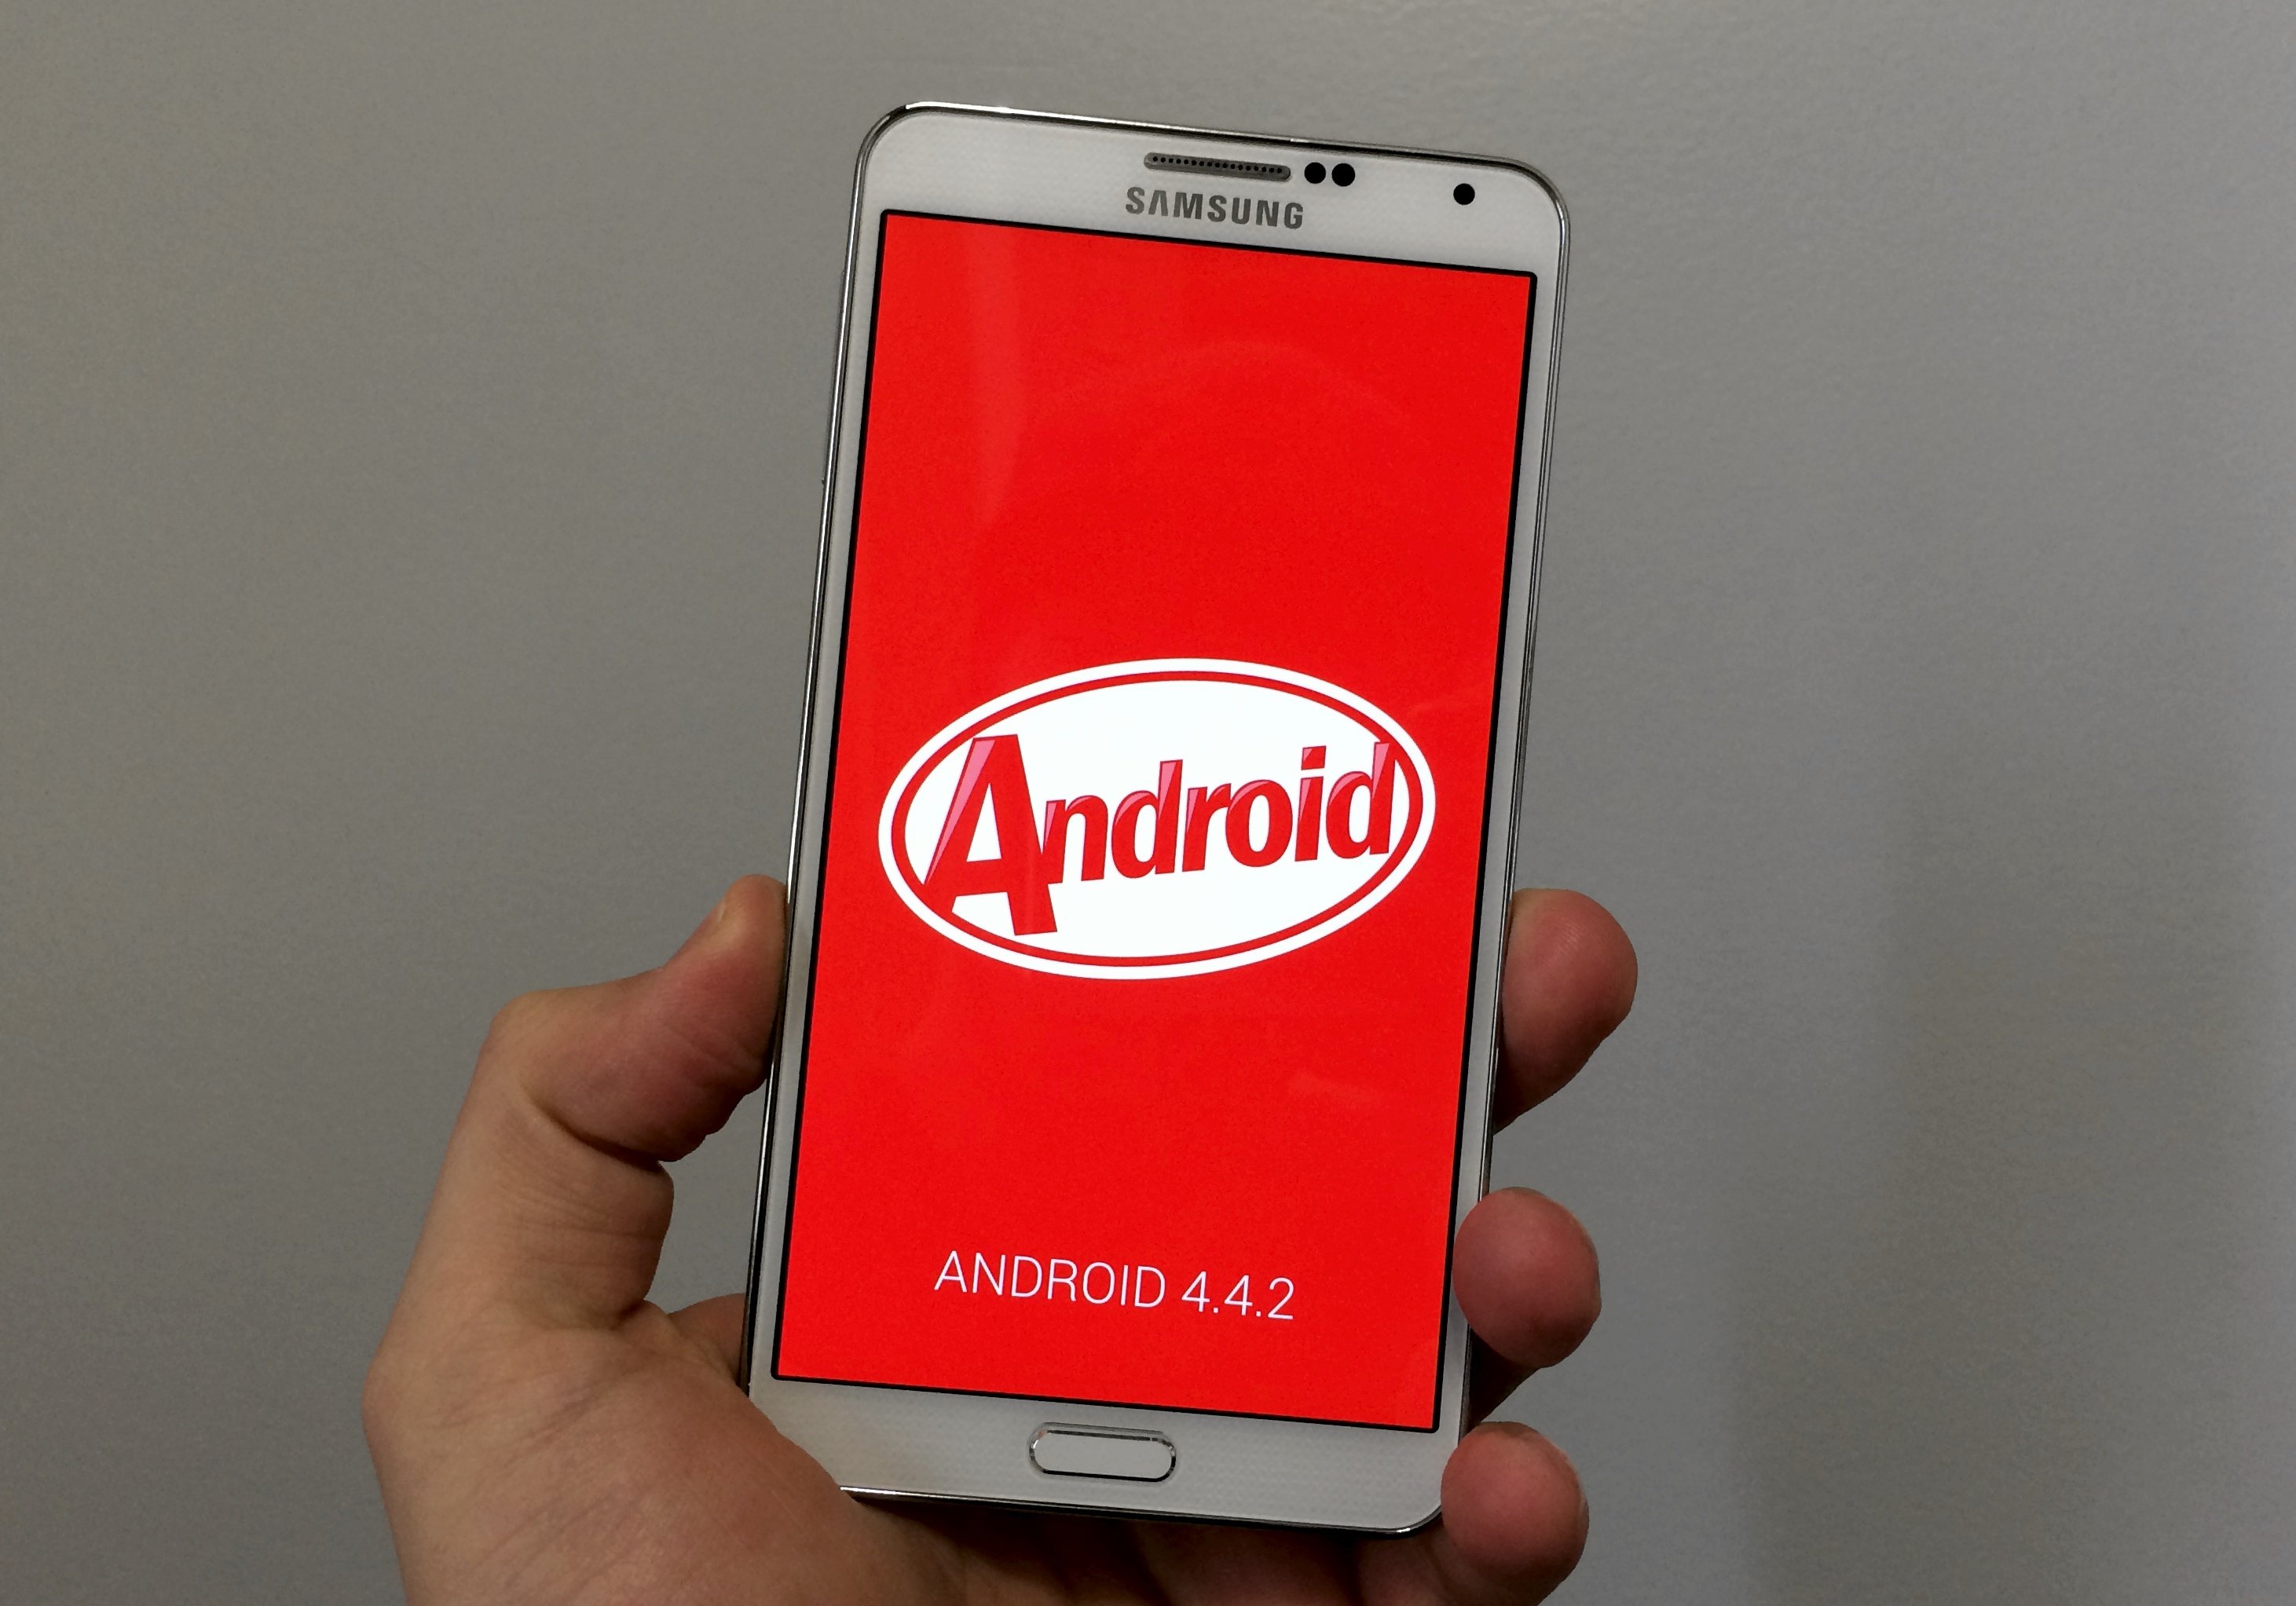 Here is an early review of the Galaxy Note 3 Android 4.4.2 update.